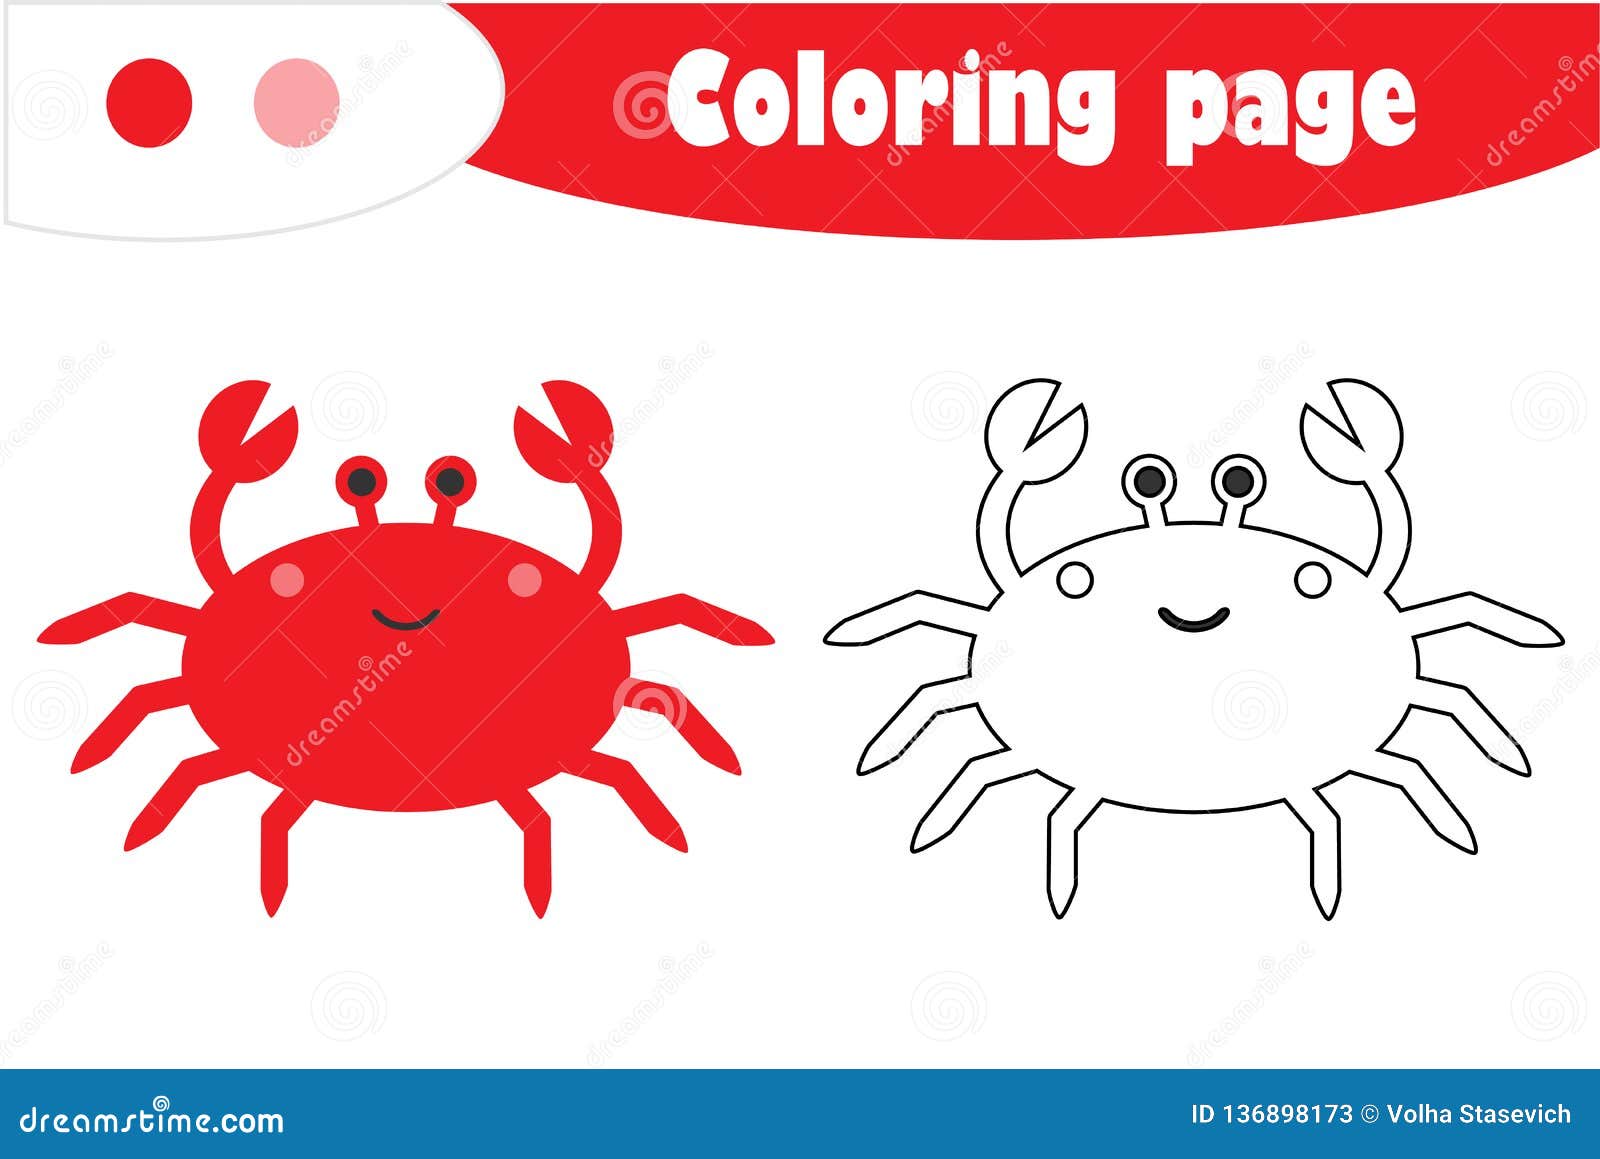 Crab In Cartoon Style Coloring Page Education Paper Game For The Development Of Children Kids Preschool Activity Printable Stock Illustration Illustration Of Educational Activity 136898173